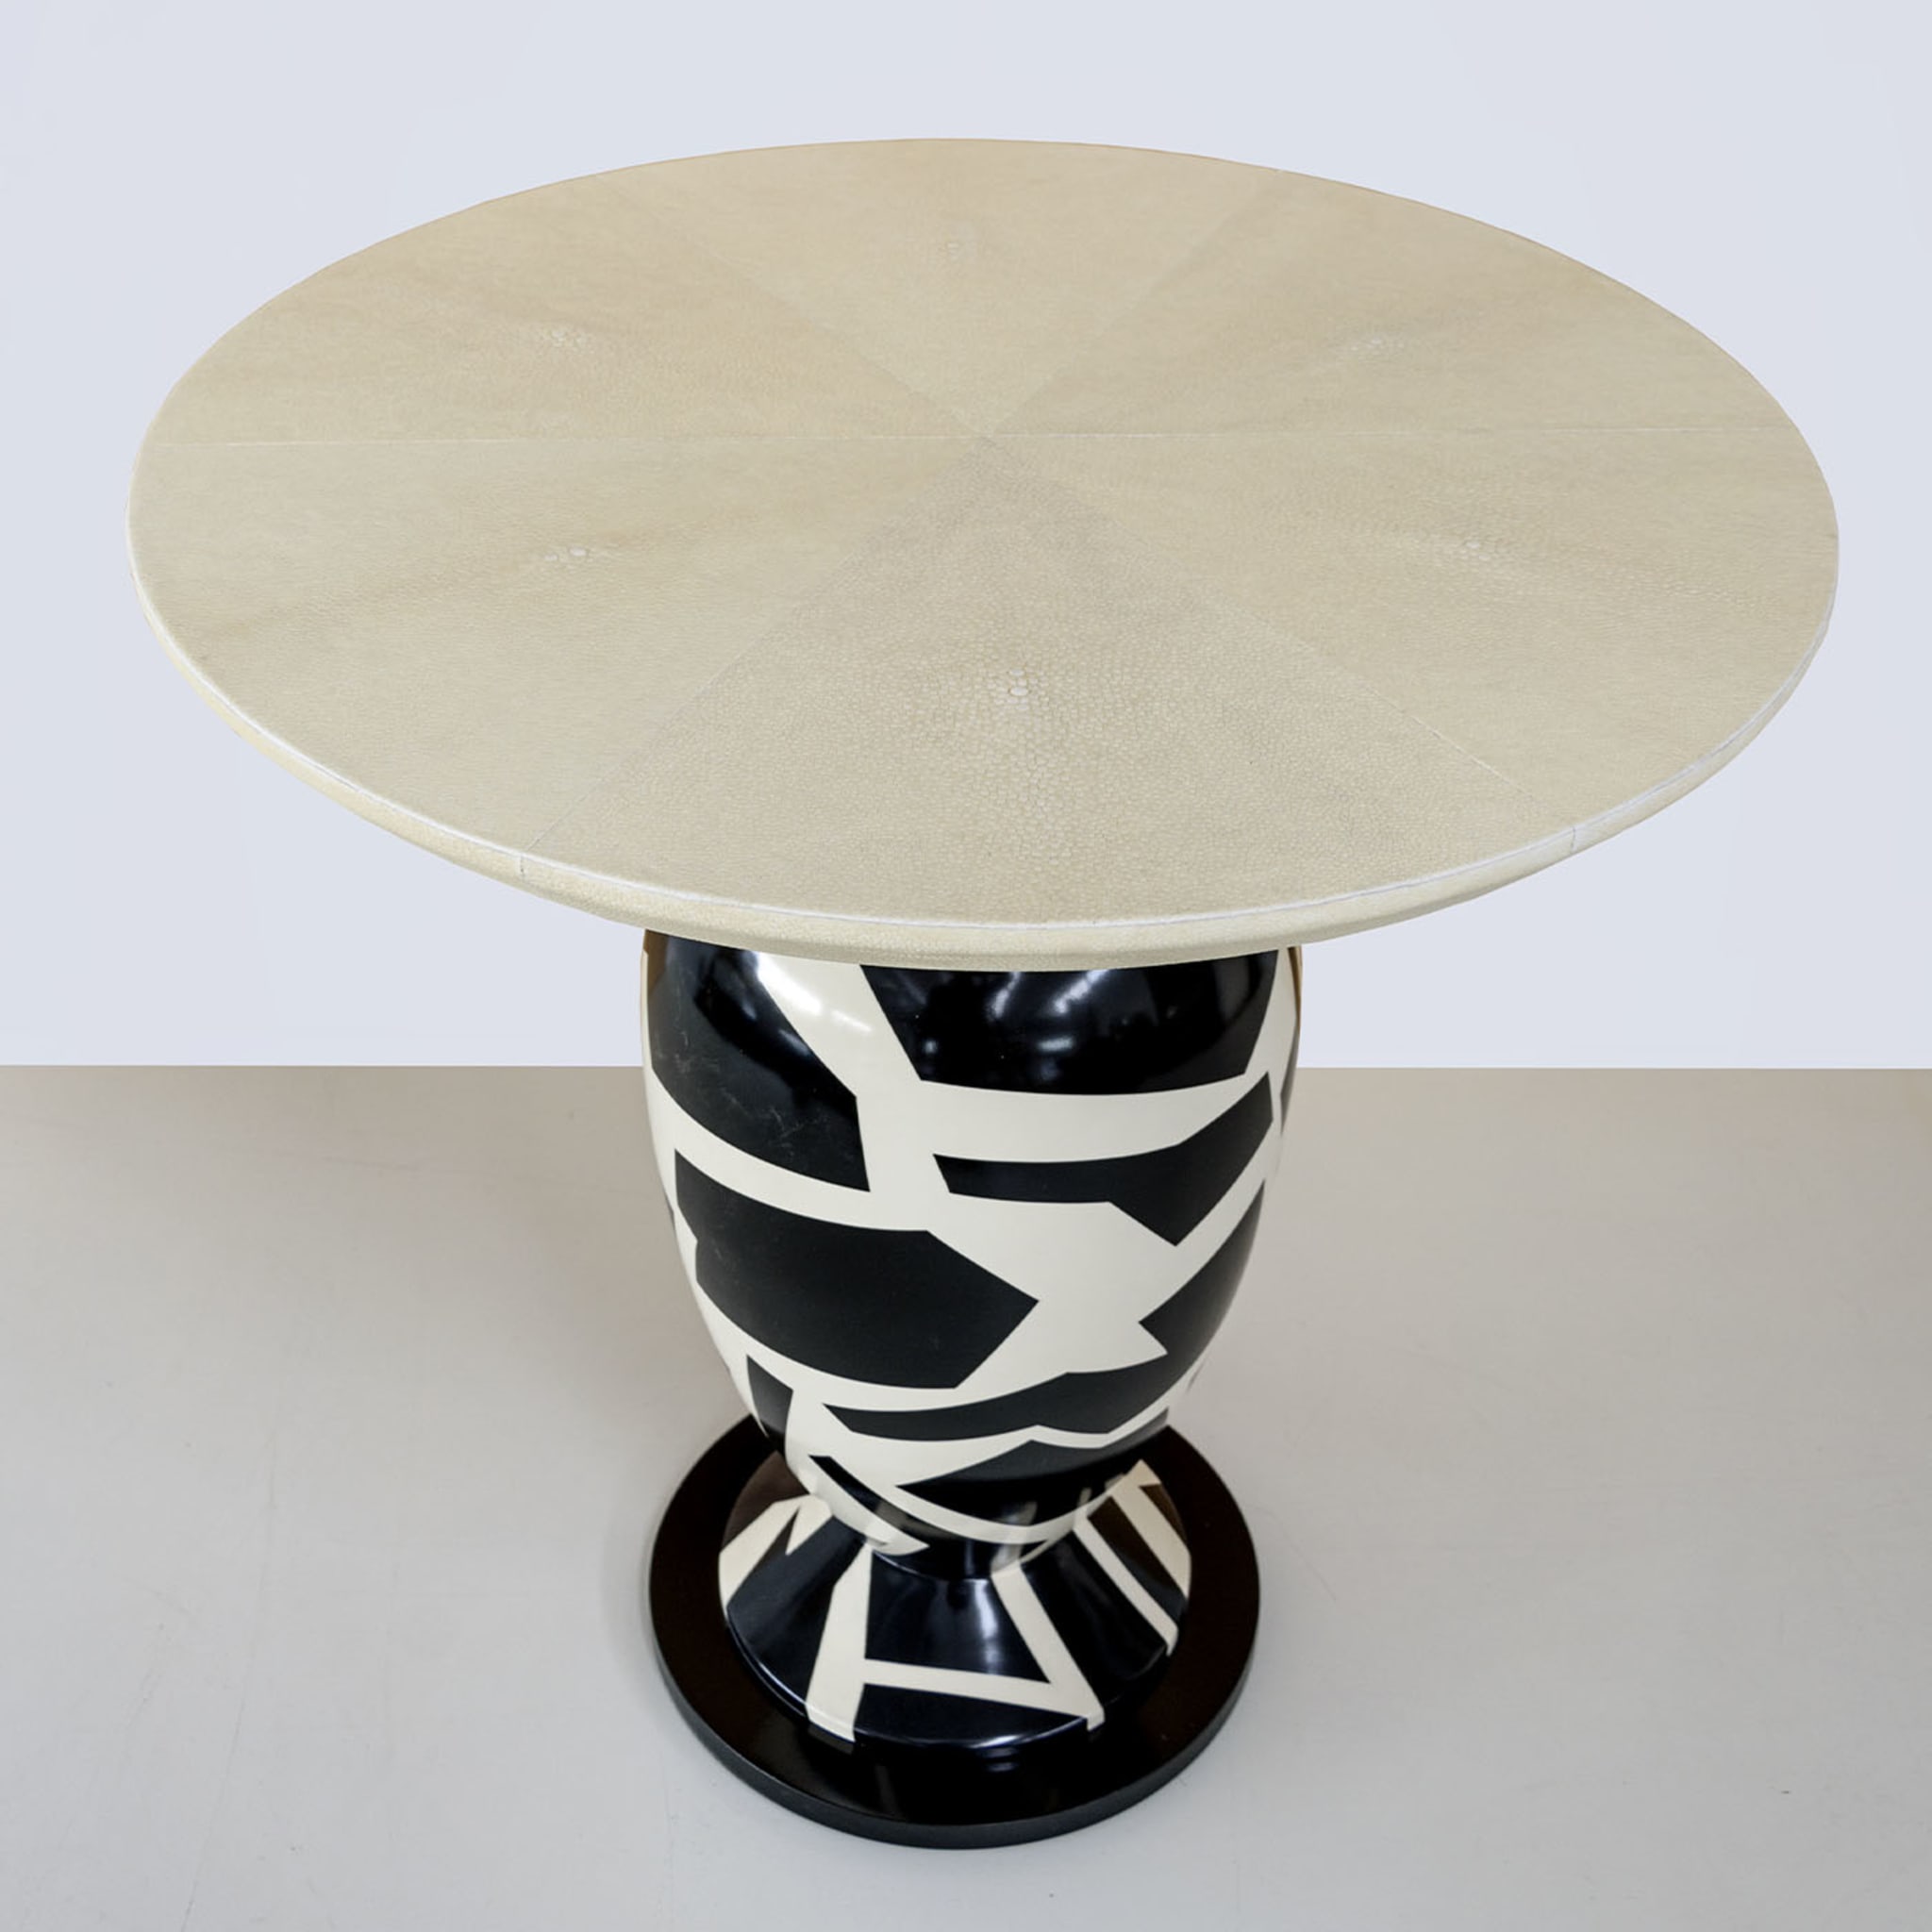 Optical Small Table By Giannella Ventura - Alternative view 3